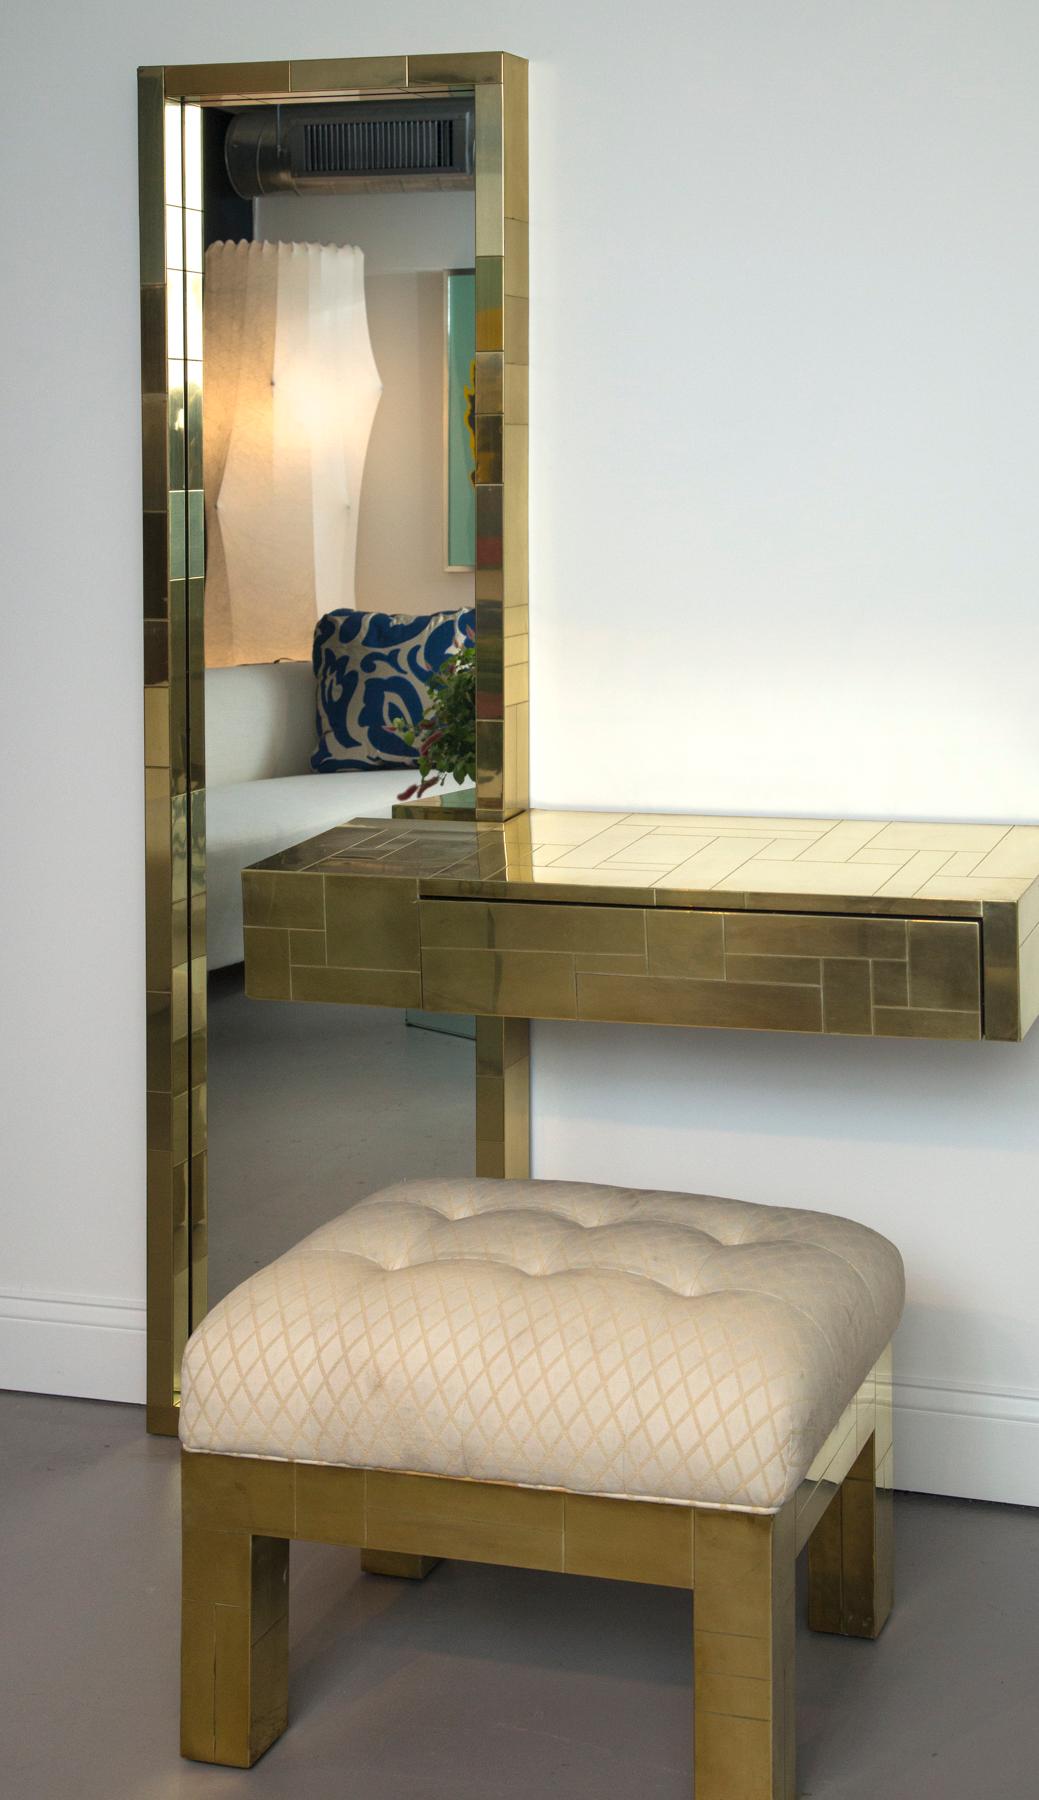 Paul Evans signed cityscape brass console with mirror and upholstered bench
Measures: Bench 17